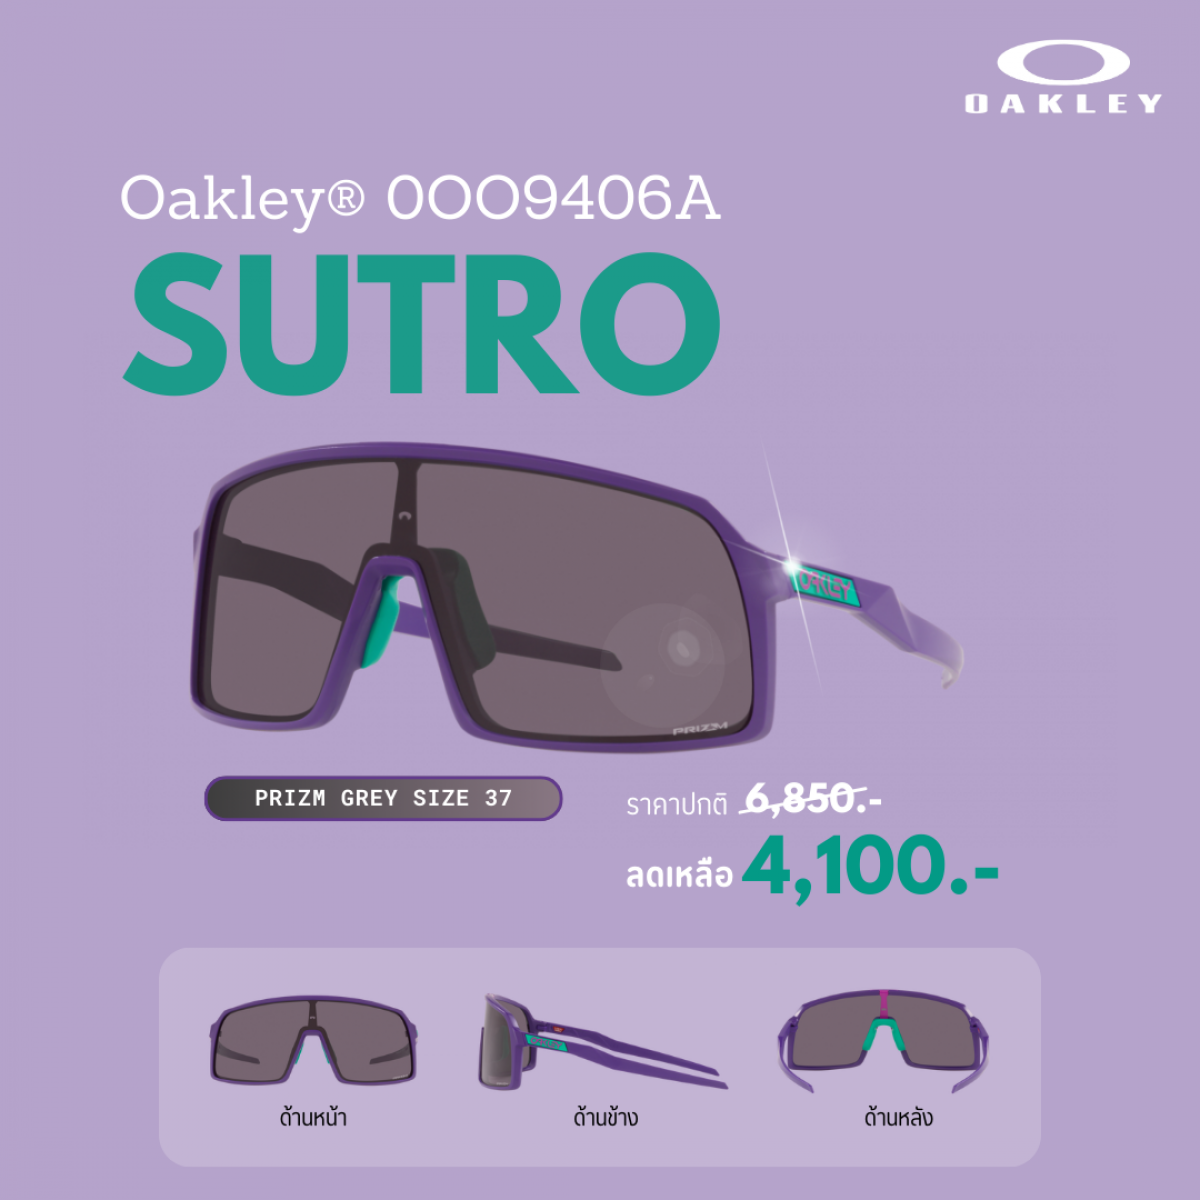 SUNGLASSES_WITH_CASE_0OO9406A_PRIZM_GREY_SIZE_37